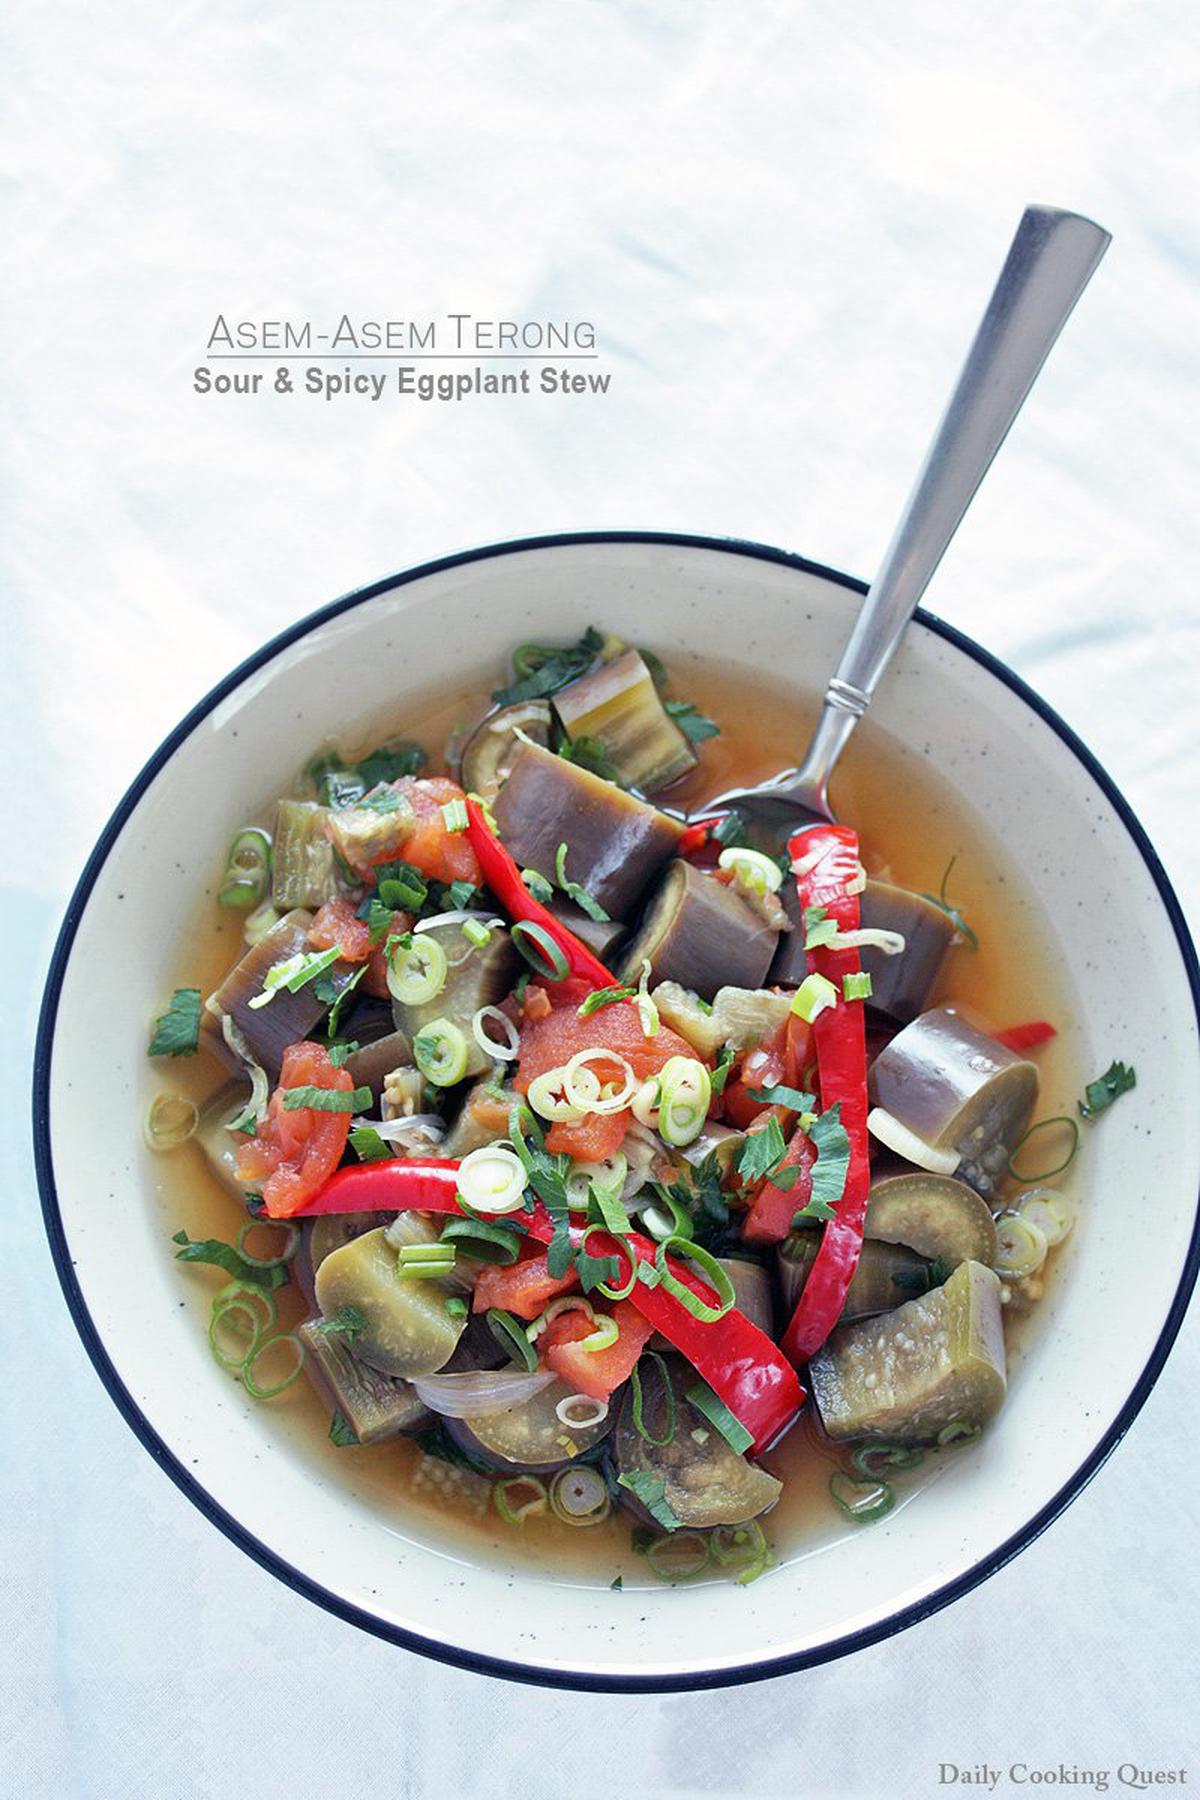 Asem-Asem Terong - Sour and Spicy Eggplant Stew